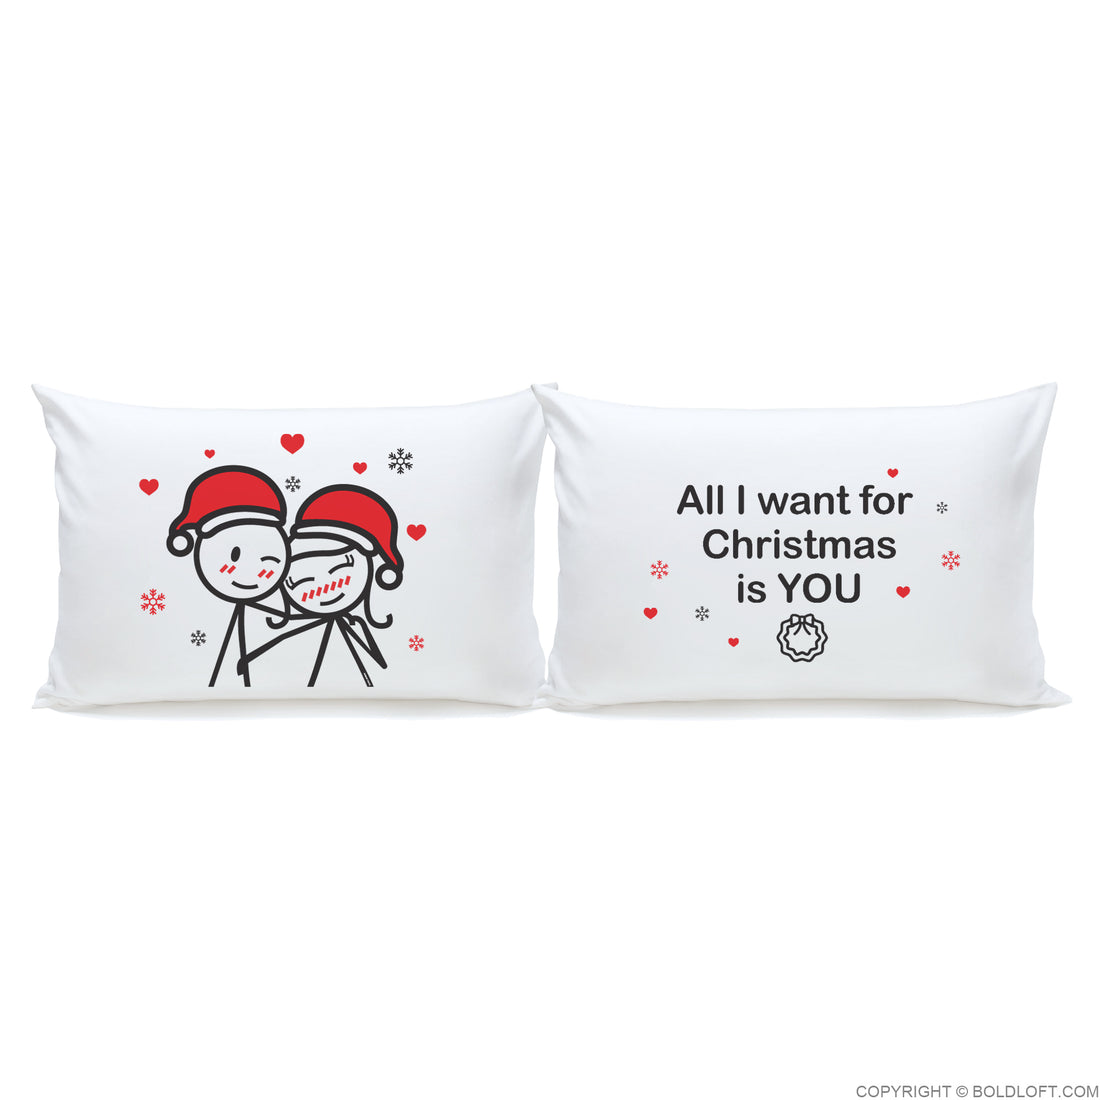 Merry Christmas™ Couple Pillowcases - All I want for Christmas is You